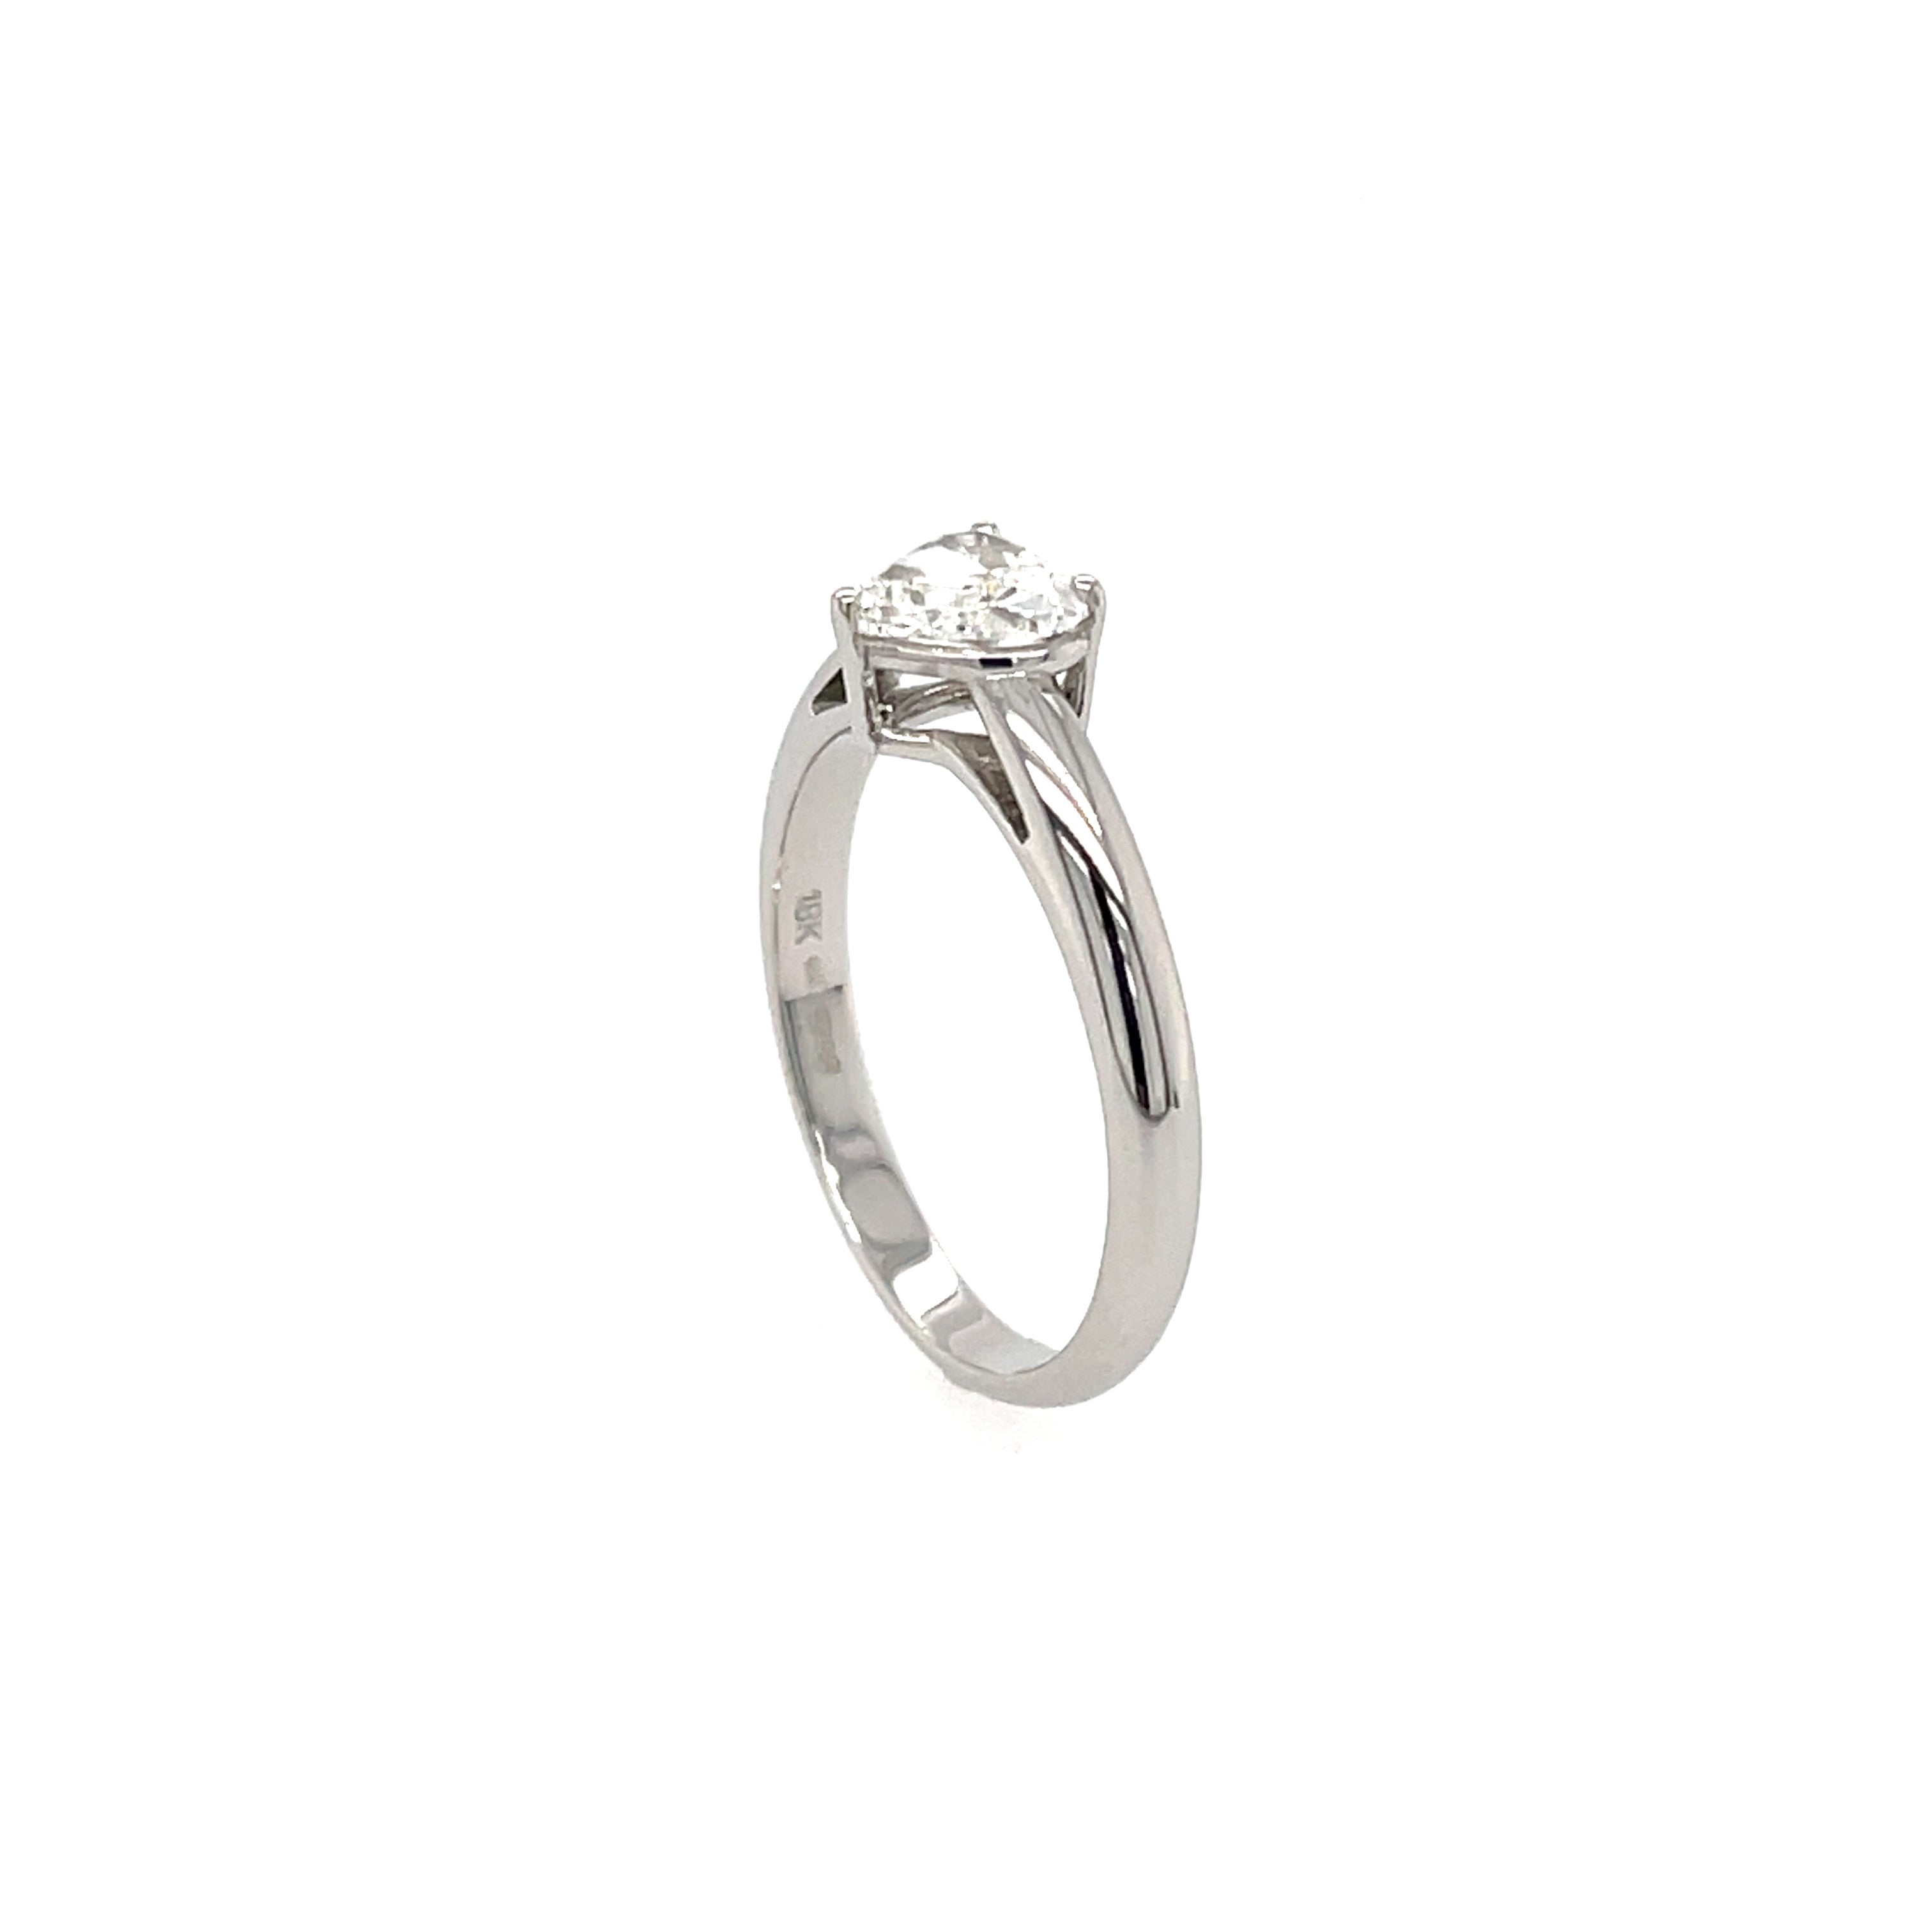 18ct White Gold 0.71ct Heart Cut Diamond Solitaire Engagement Ring Certified F VS2